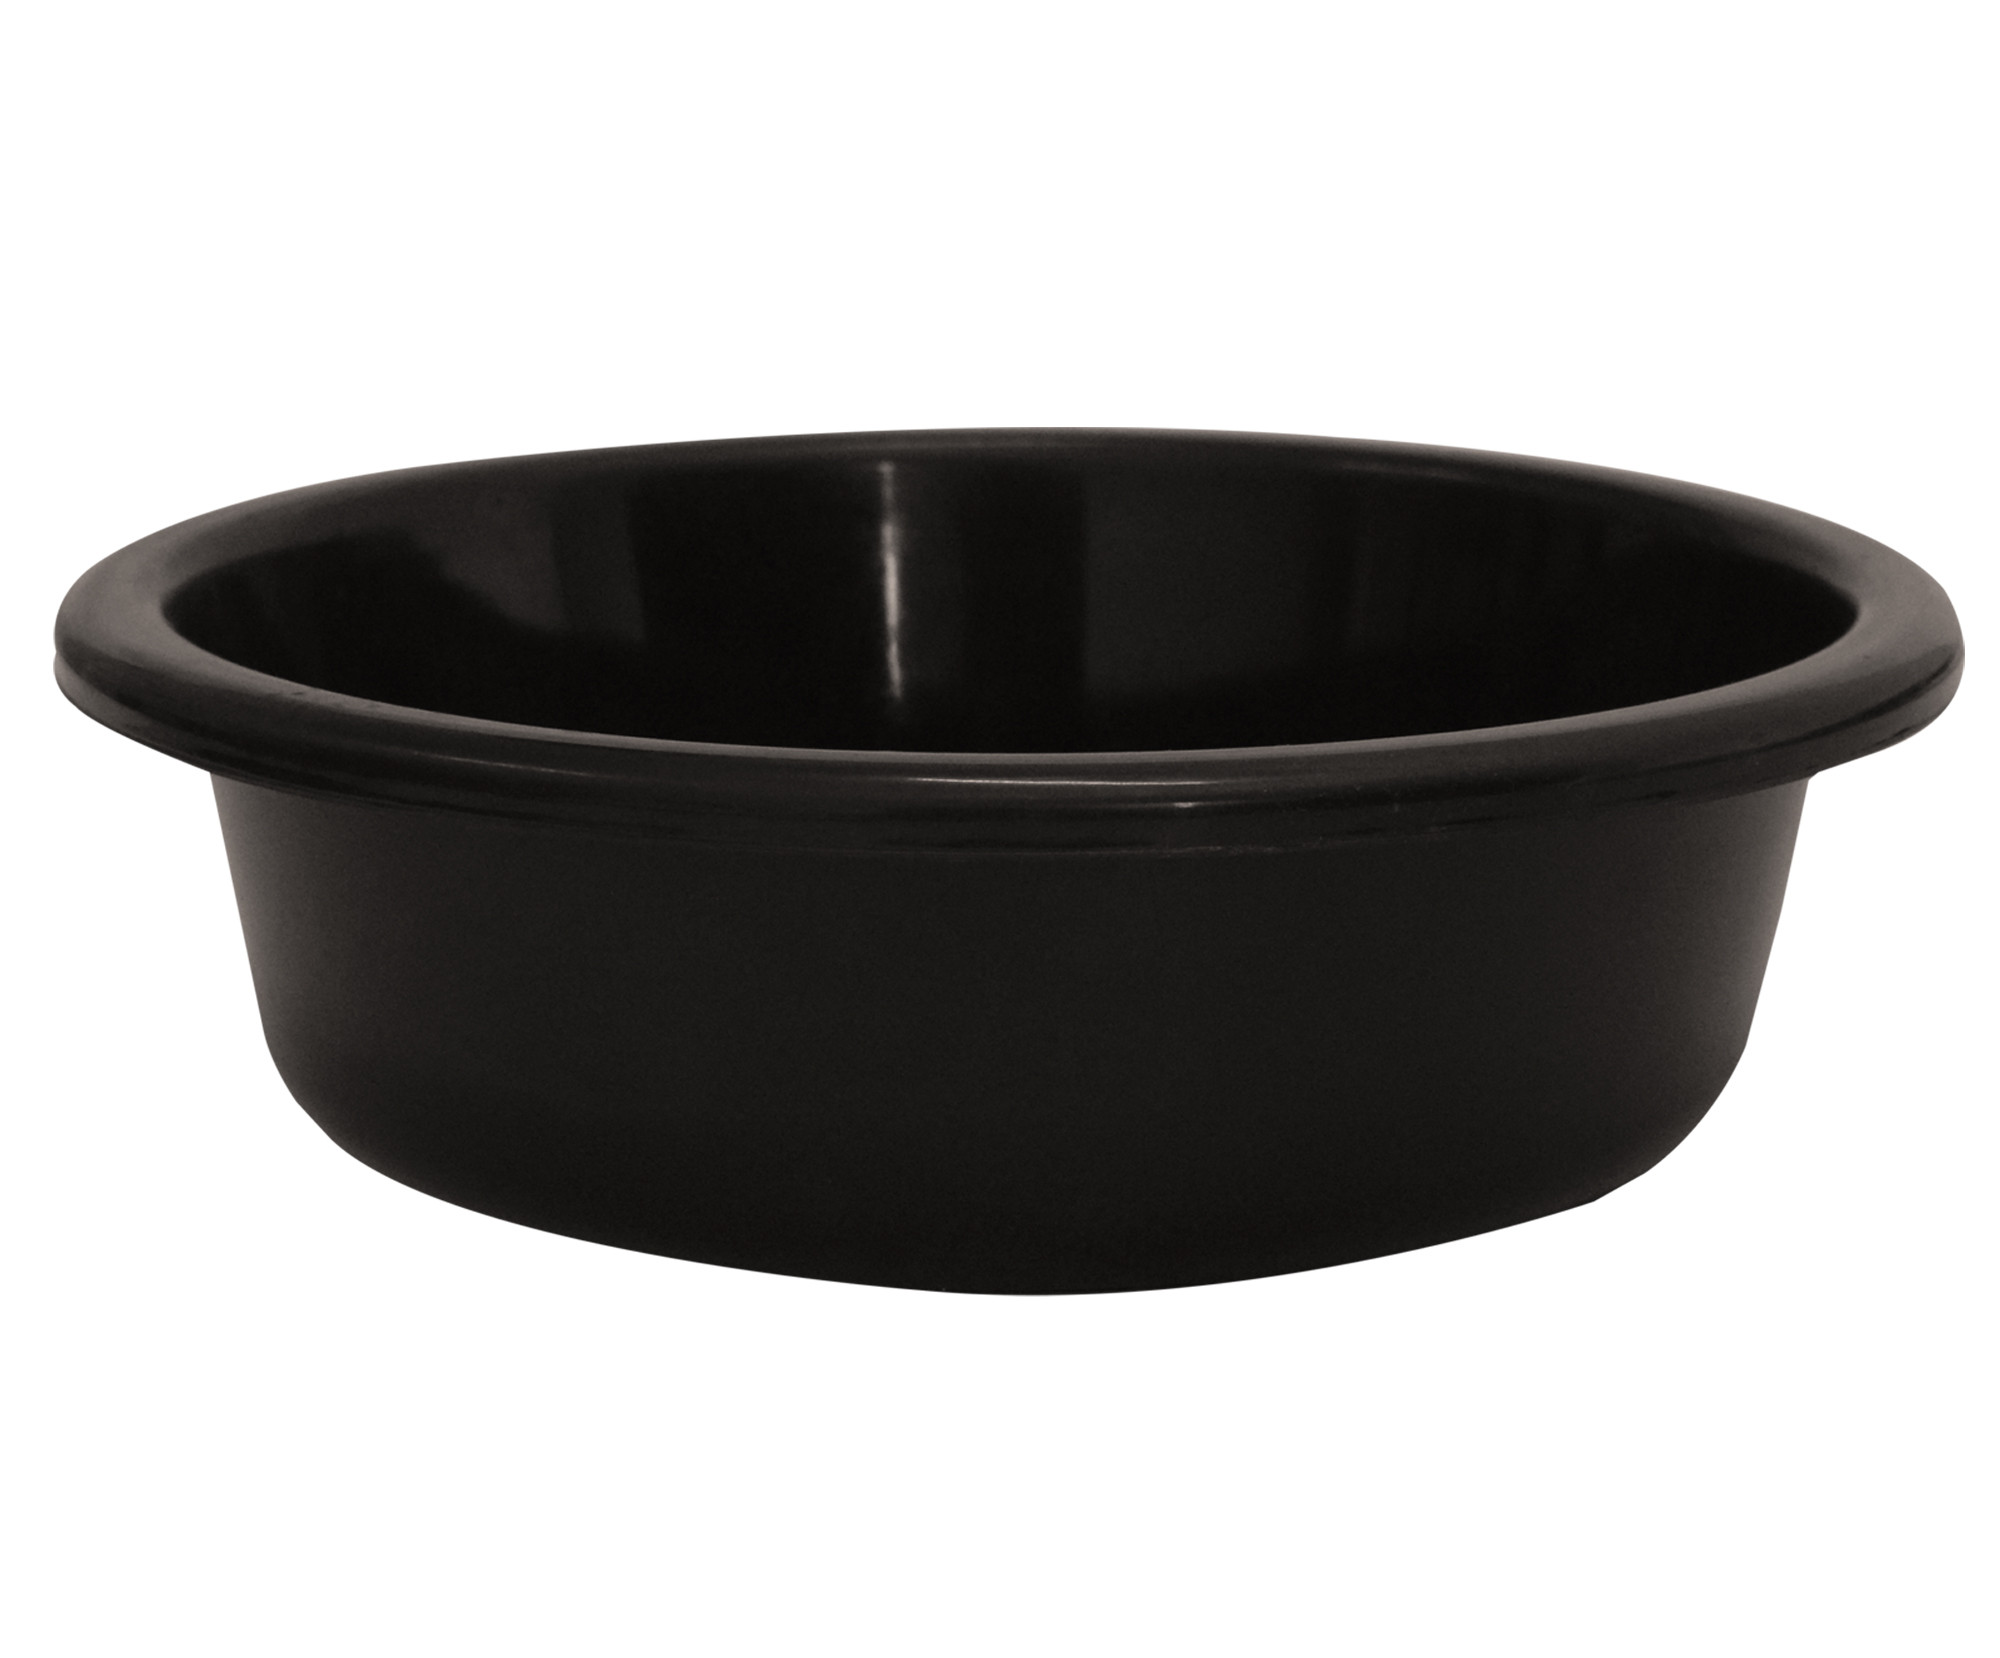 Kuber Industries Multiuses Unbreakable Plastic Knead Dough Basket/Basin Bowl For Home & Kitchen 6 Ltr- Pack of 2 (Black & Green)